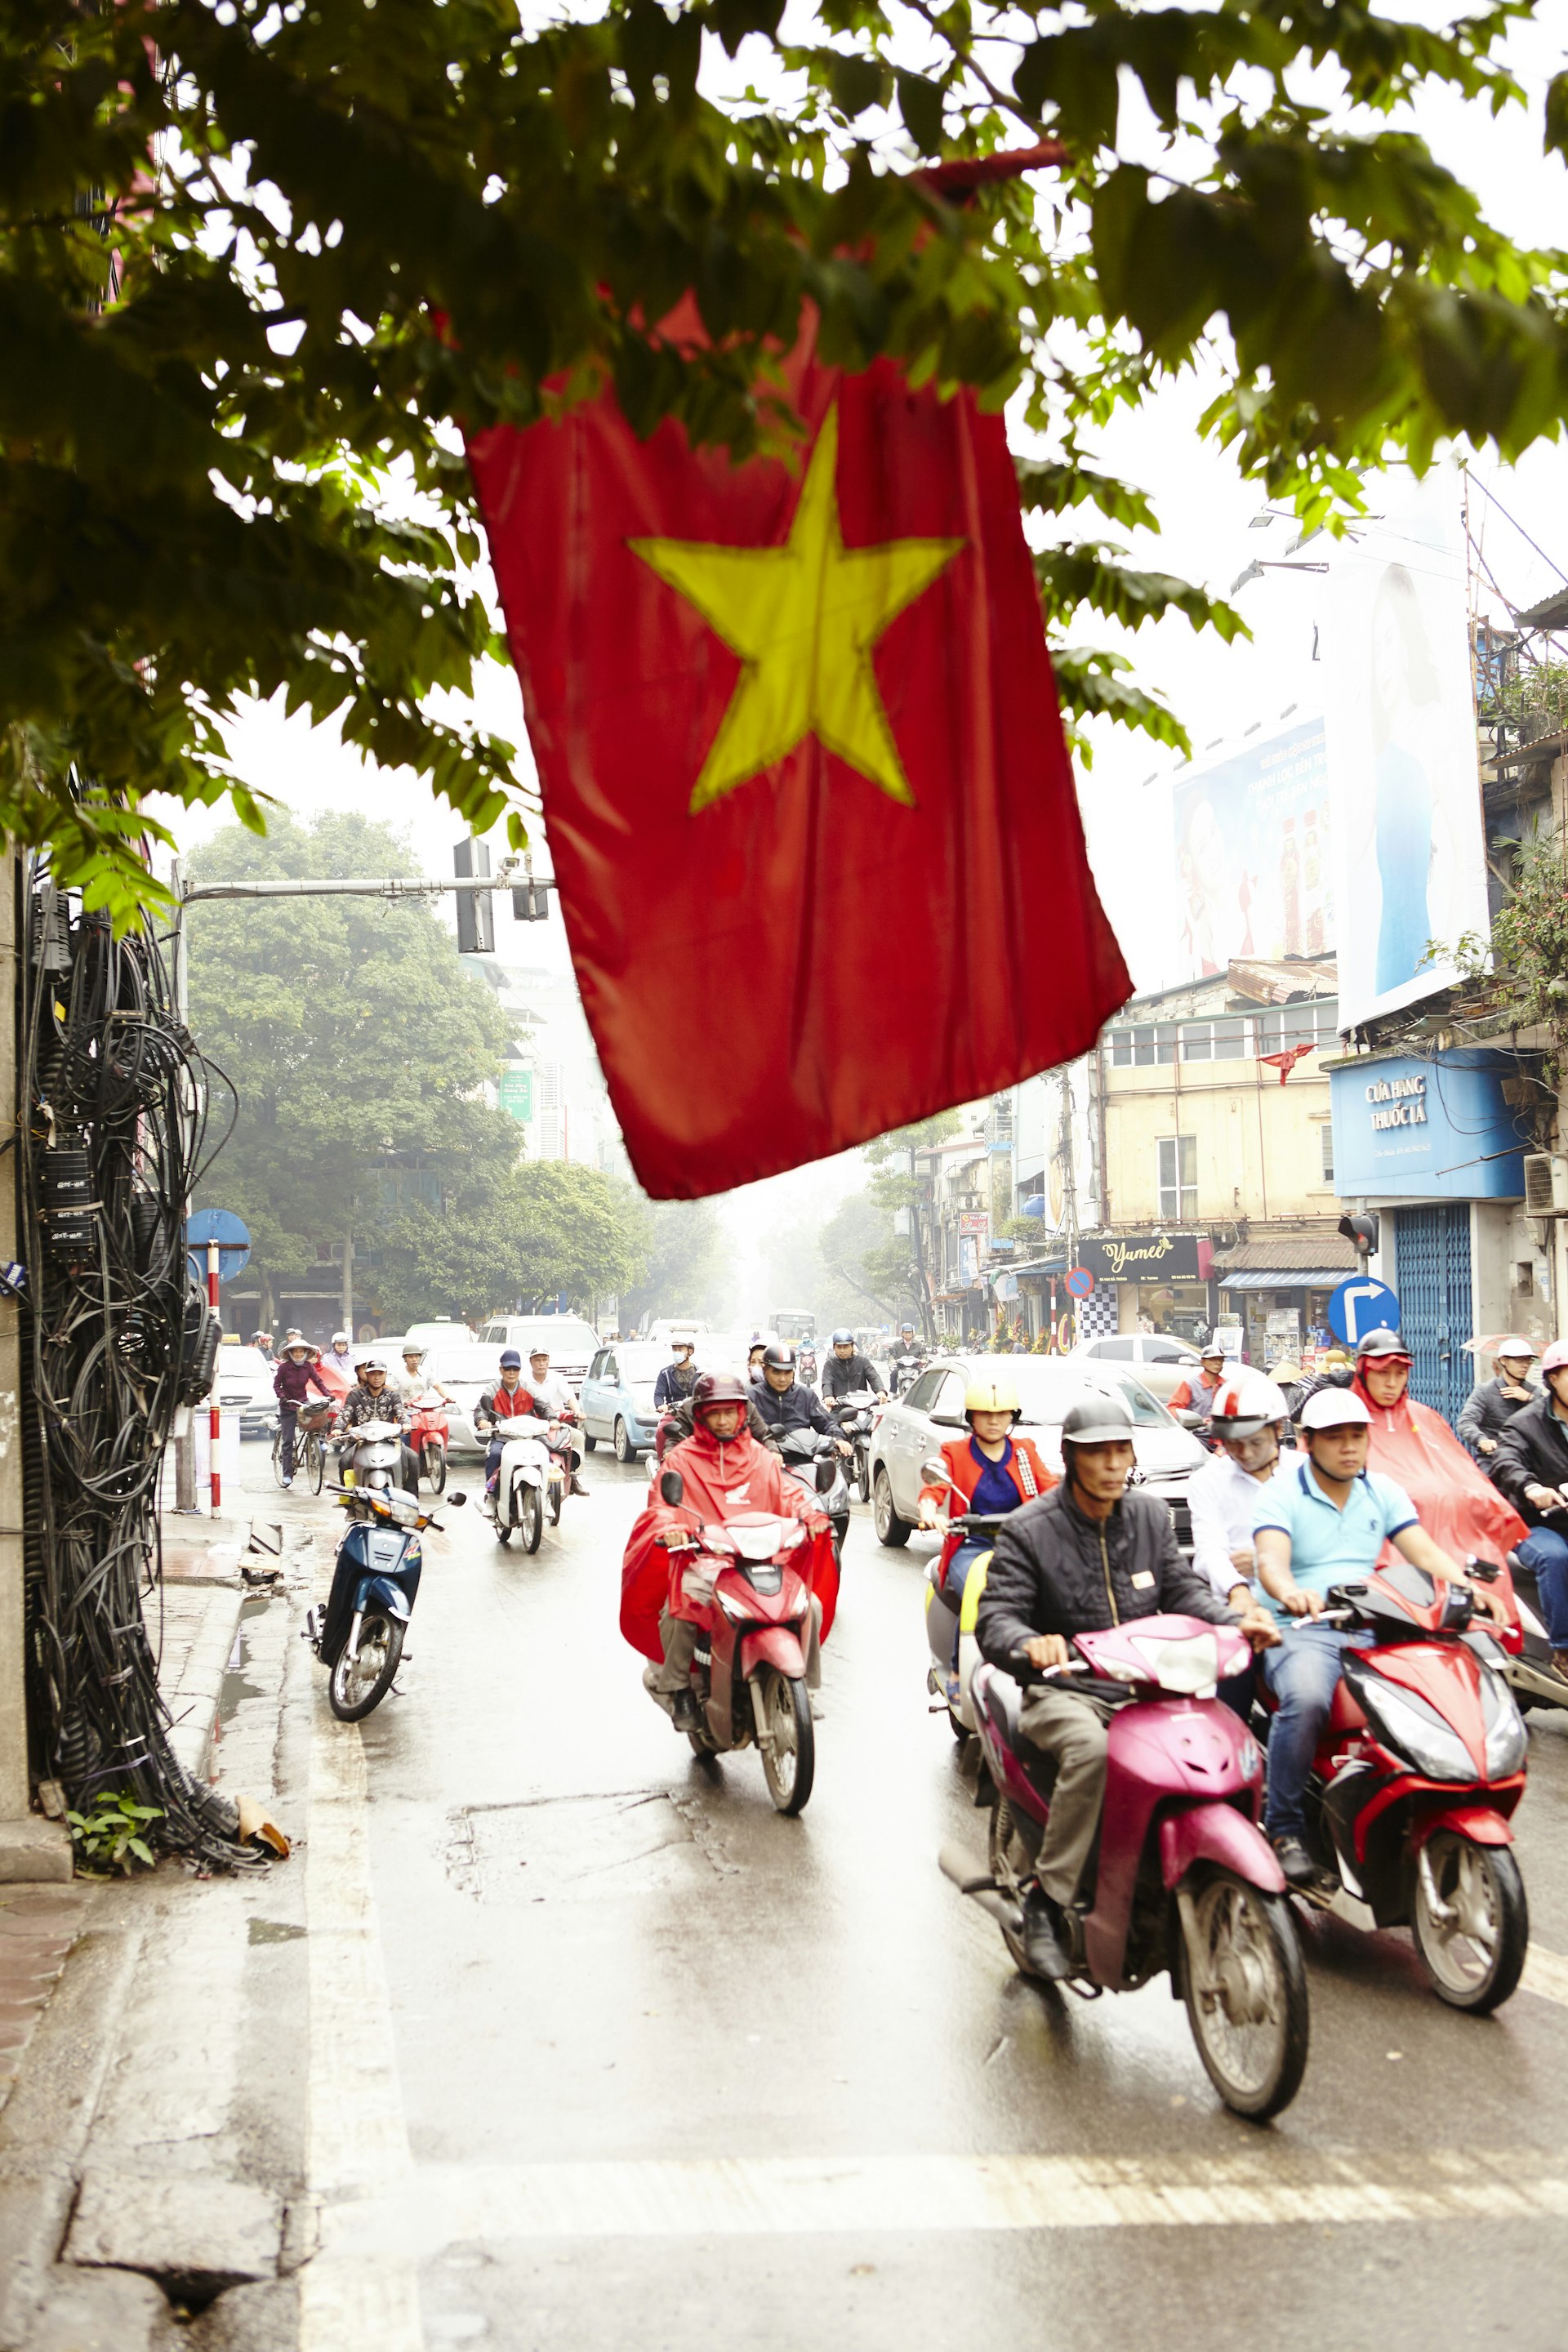 A red flag with a yellow star in the center hangs low over a street packed with motorcyclists